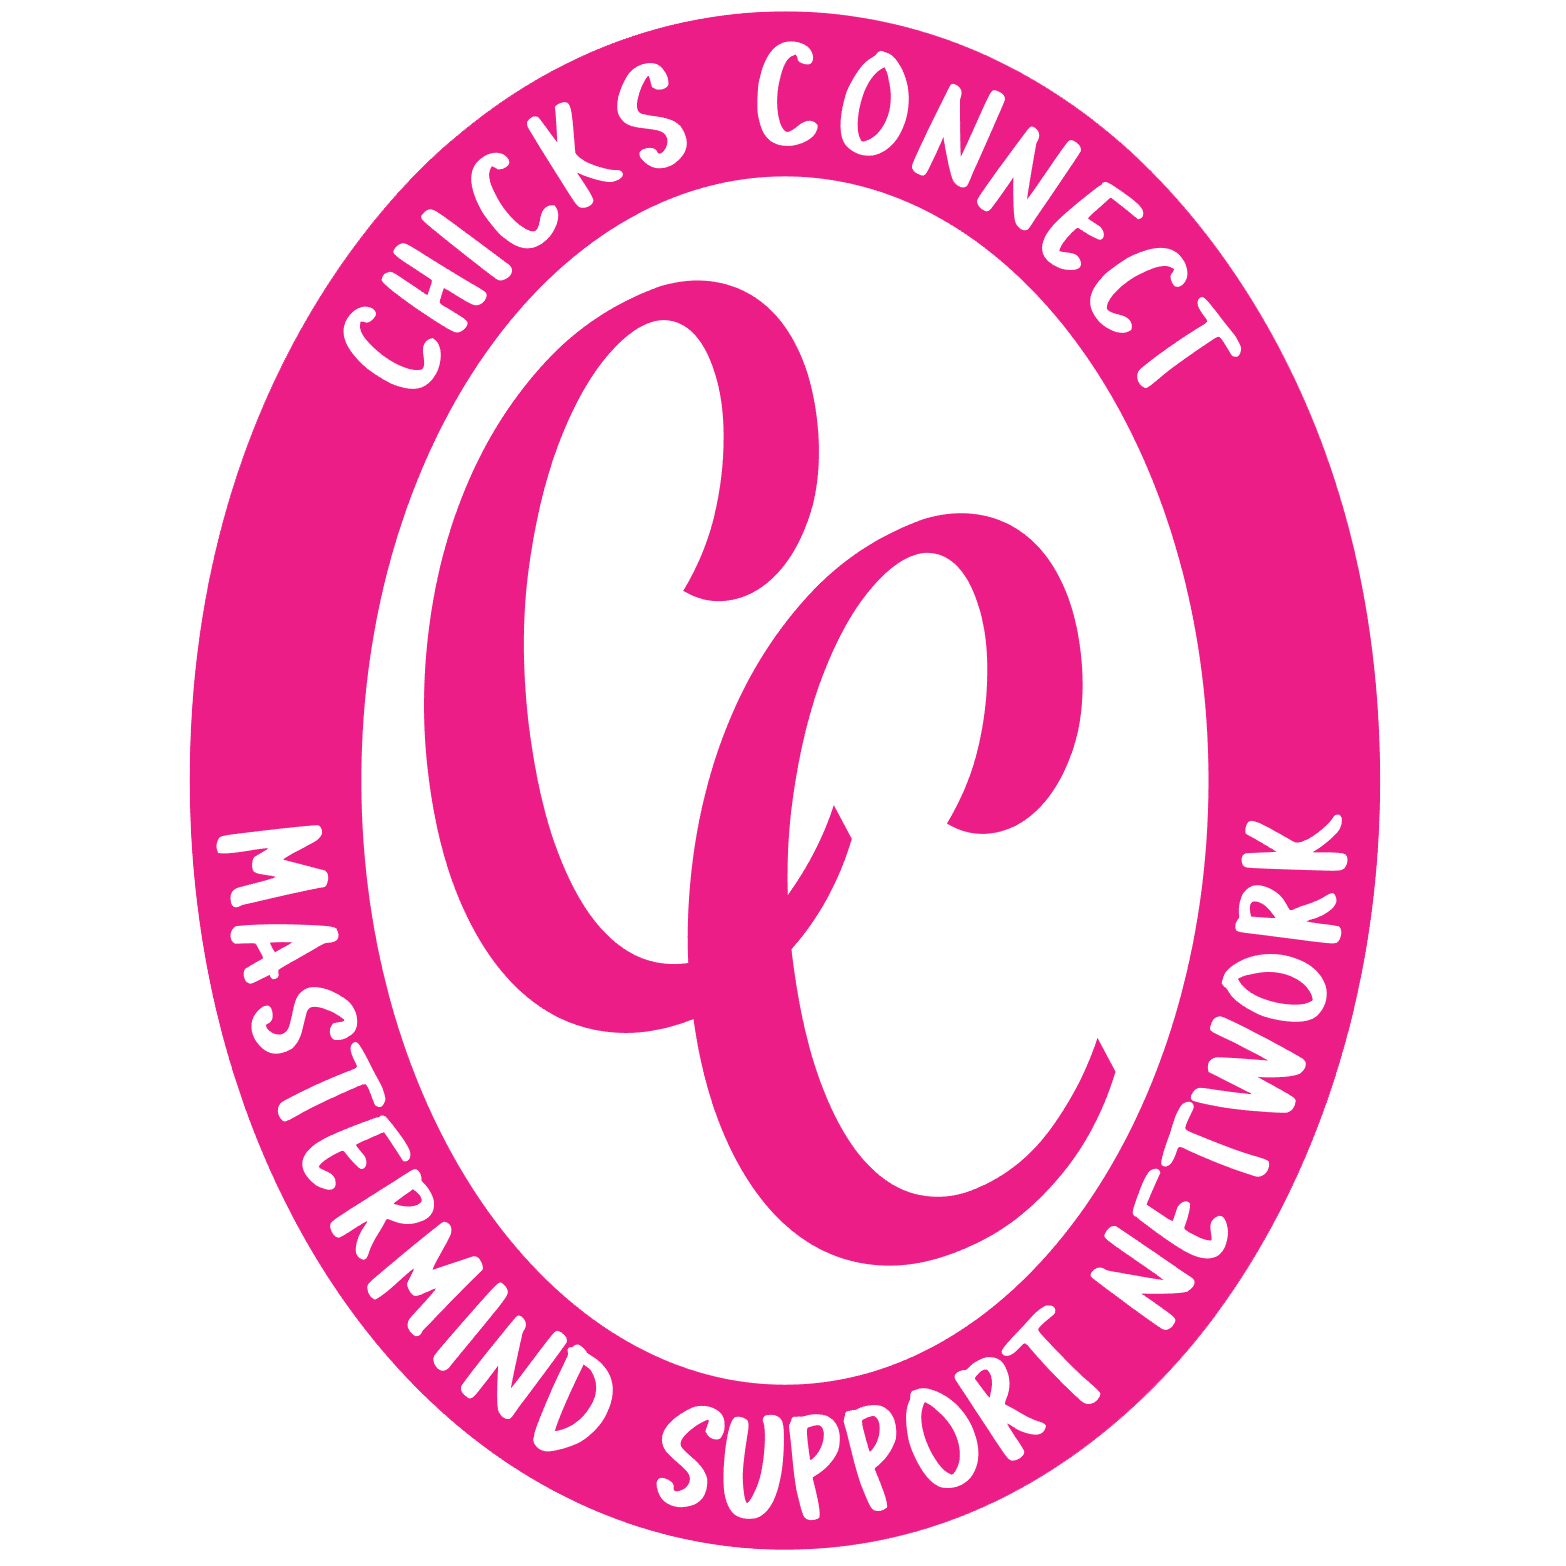 Chicks Connect Mastermind Support Network